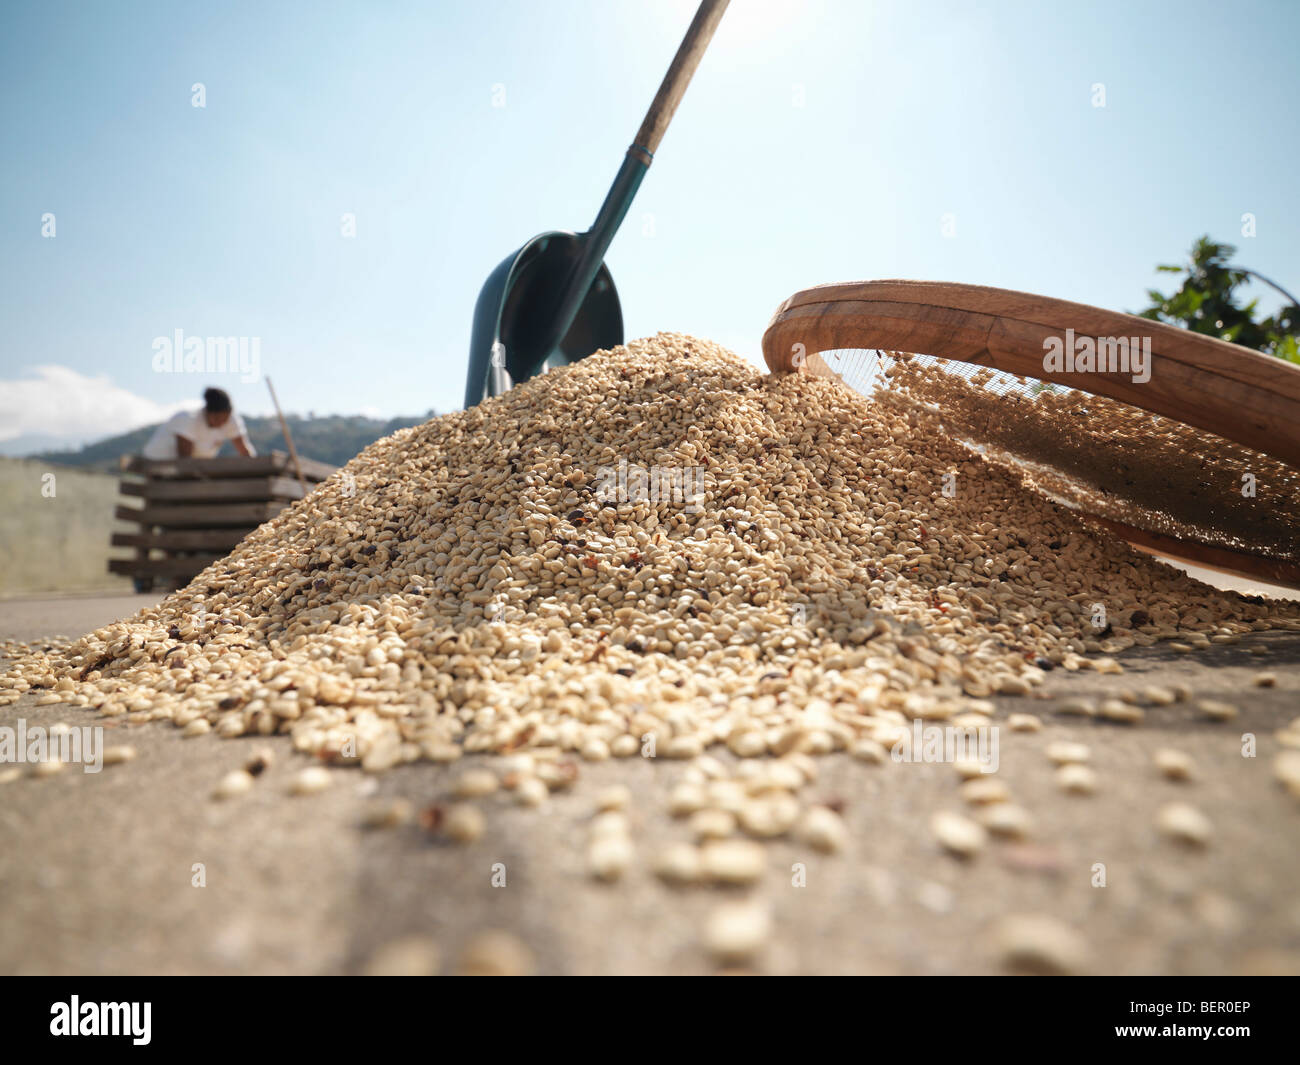 Pile Of Coffee Beans With Shovel Stock Photo